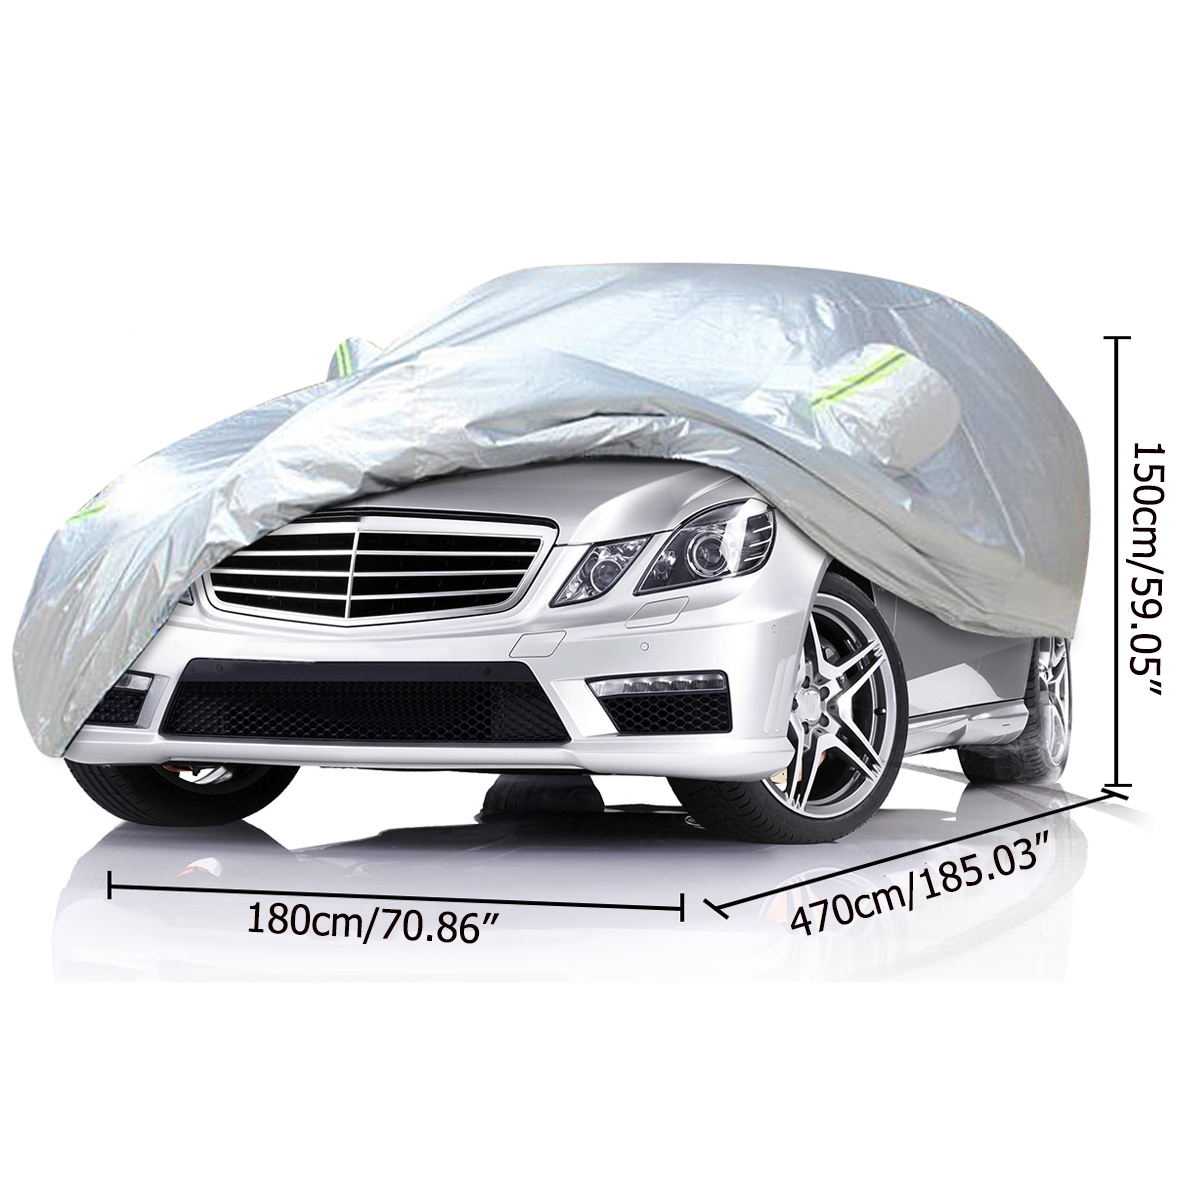 MATCC Car Cover Waterproof Auto Cover All Season All Weather Fit Most of Cars (470*180*150cm)